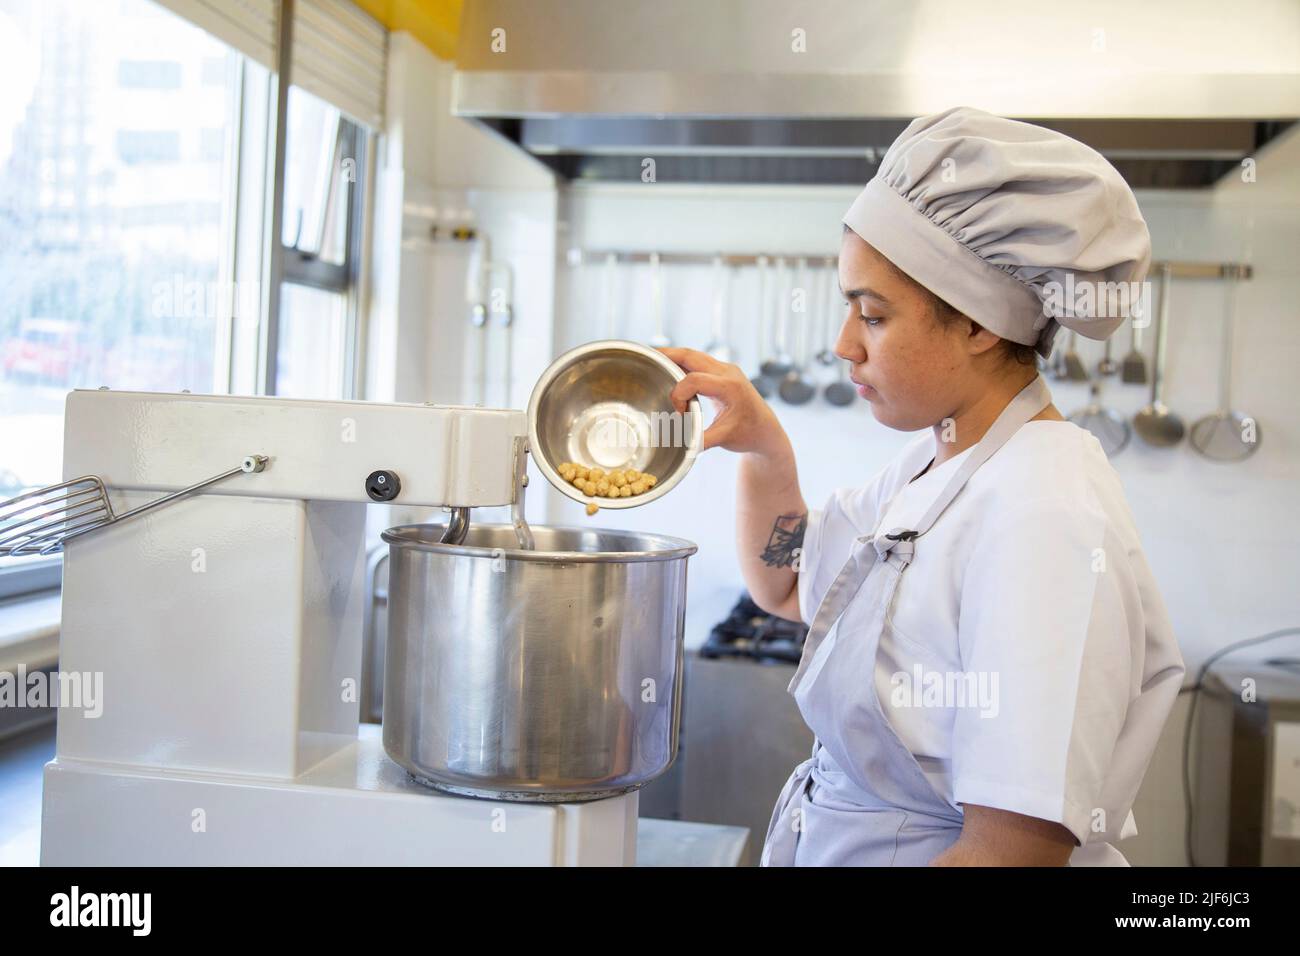 Side view of female baker in uniform pouring ingredient into metal bowl of dough mixer while standing in bakery school Stock Photo